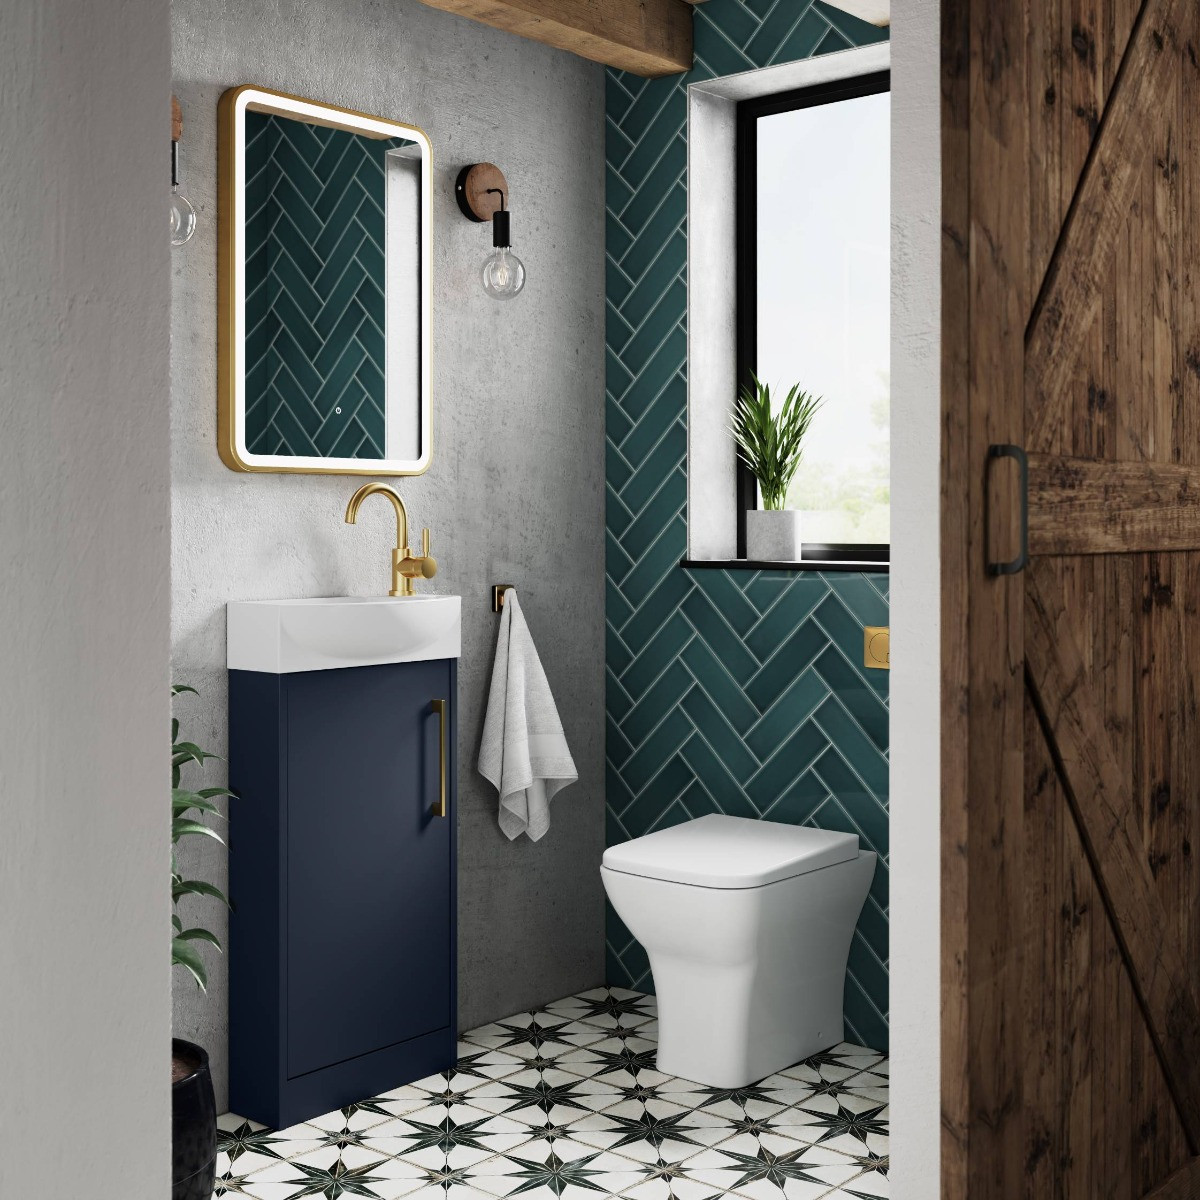 Cheap Small Bathroom Ideas - Product Guides and Inspiration